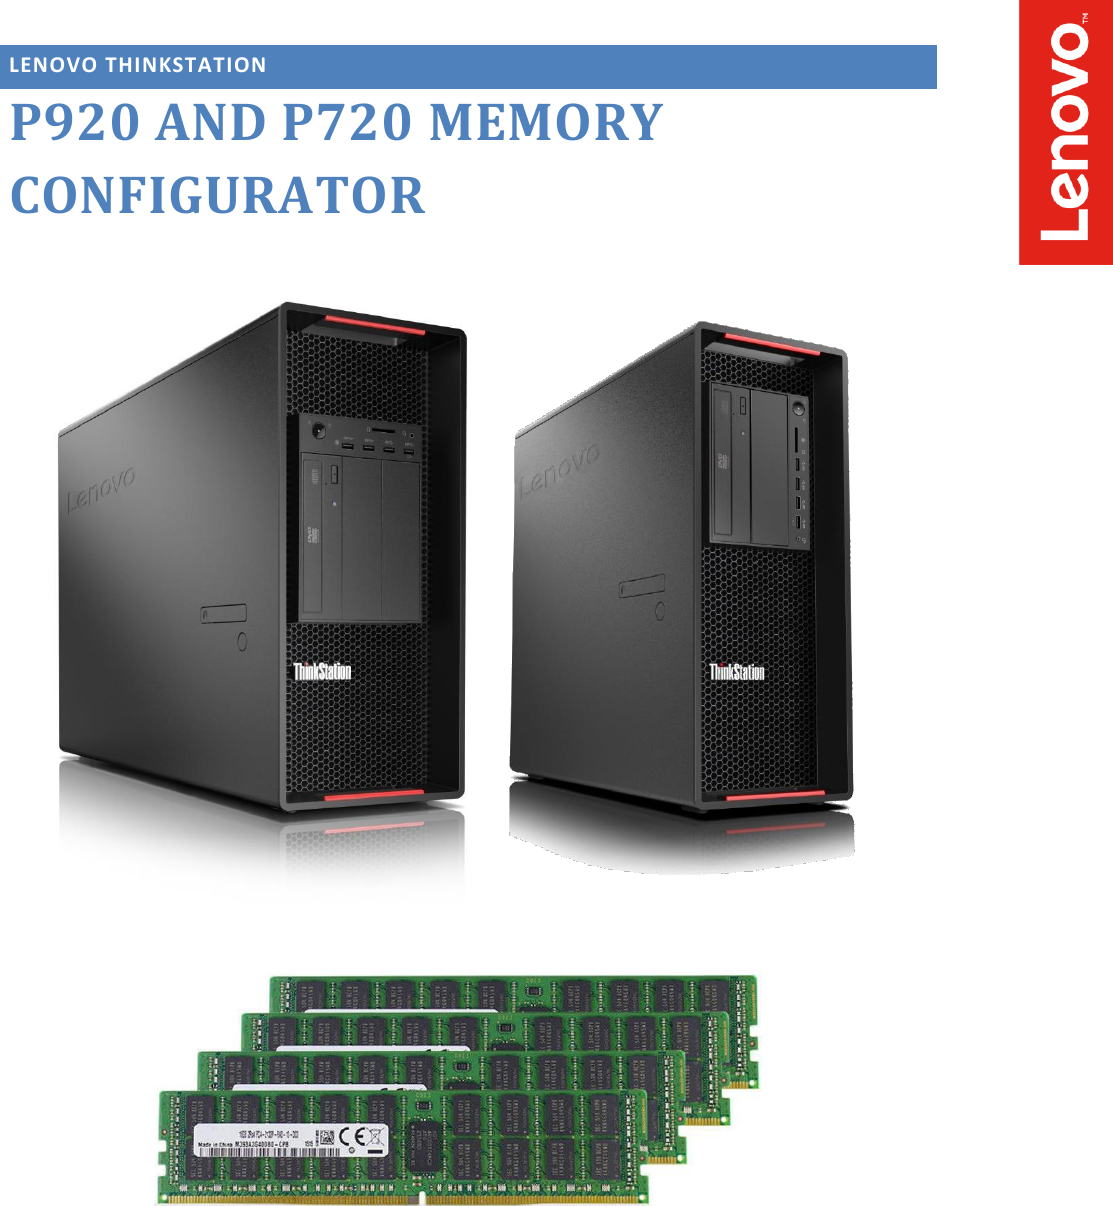 Page 1 of 9 - Lenovo Thinkstation P920 P720 Memory Configurations V1.0 User Manual - Think Station P720, Workstation (Think Station) Type 30BC